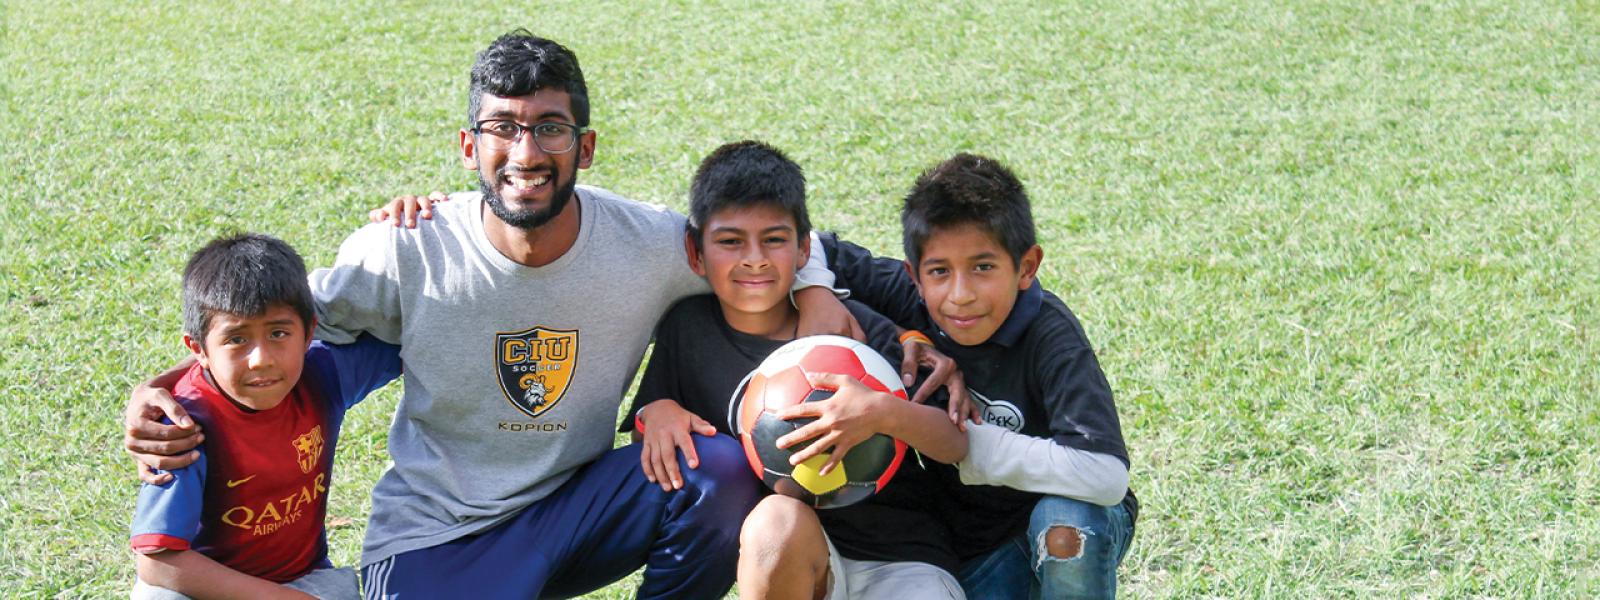 CIU soccer player playing with children.